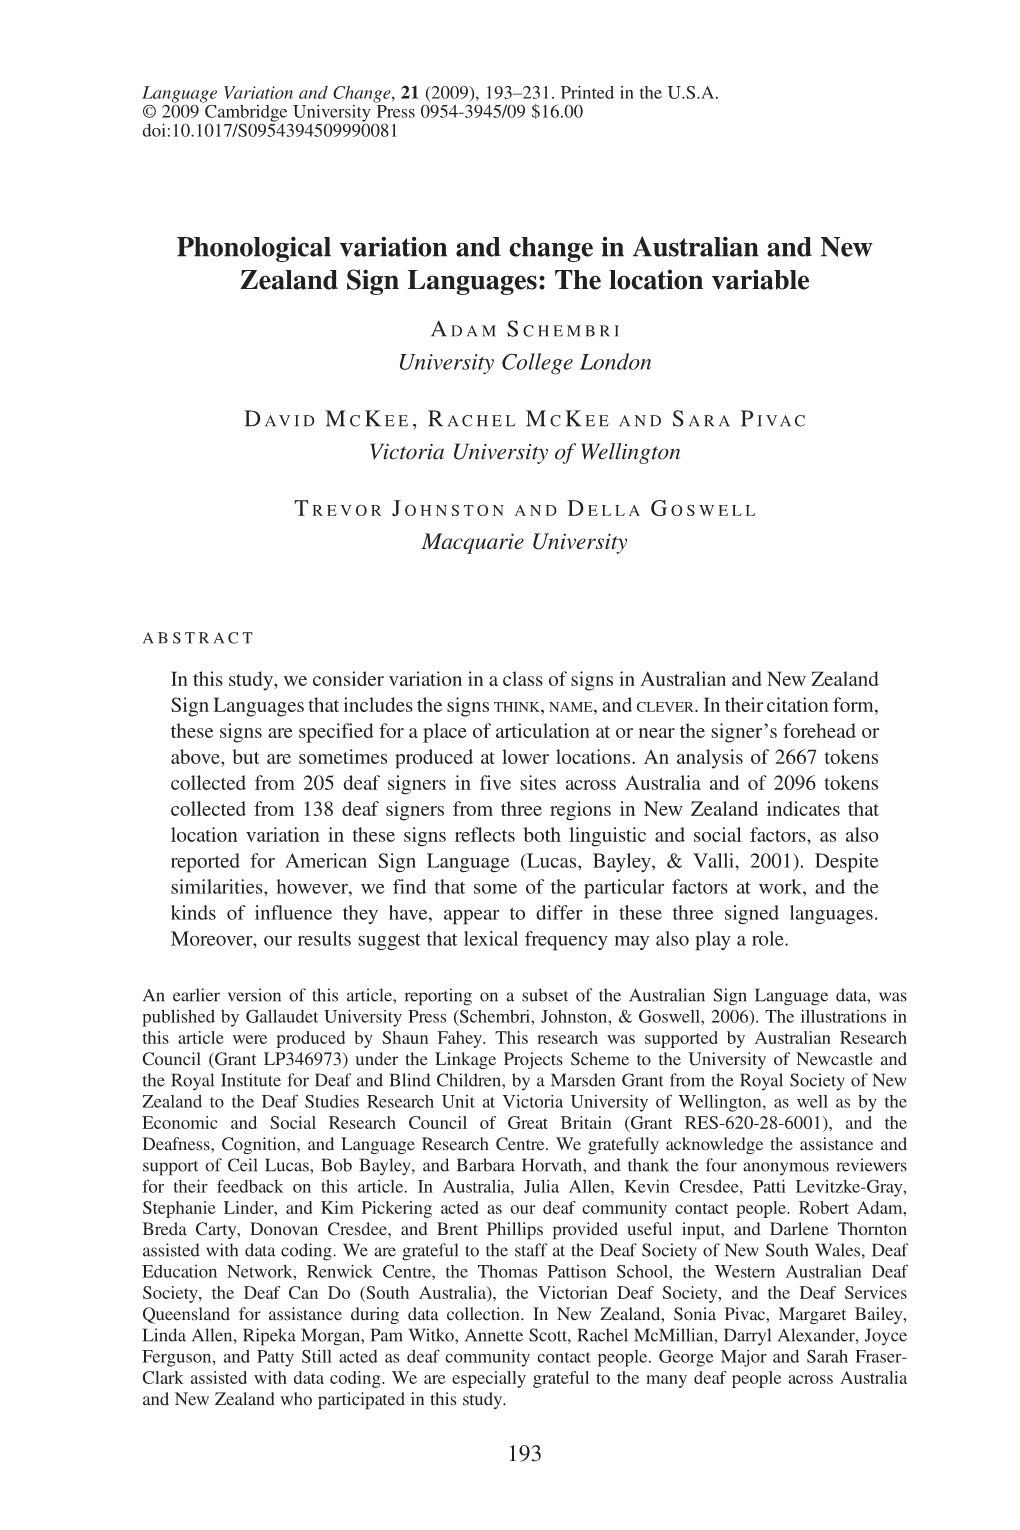 Phonological Variation and Change in Australian and New Zealand Sign Languages: the Location Variable